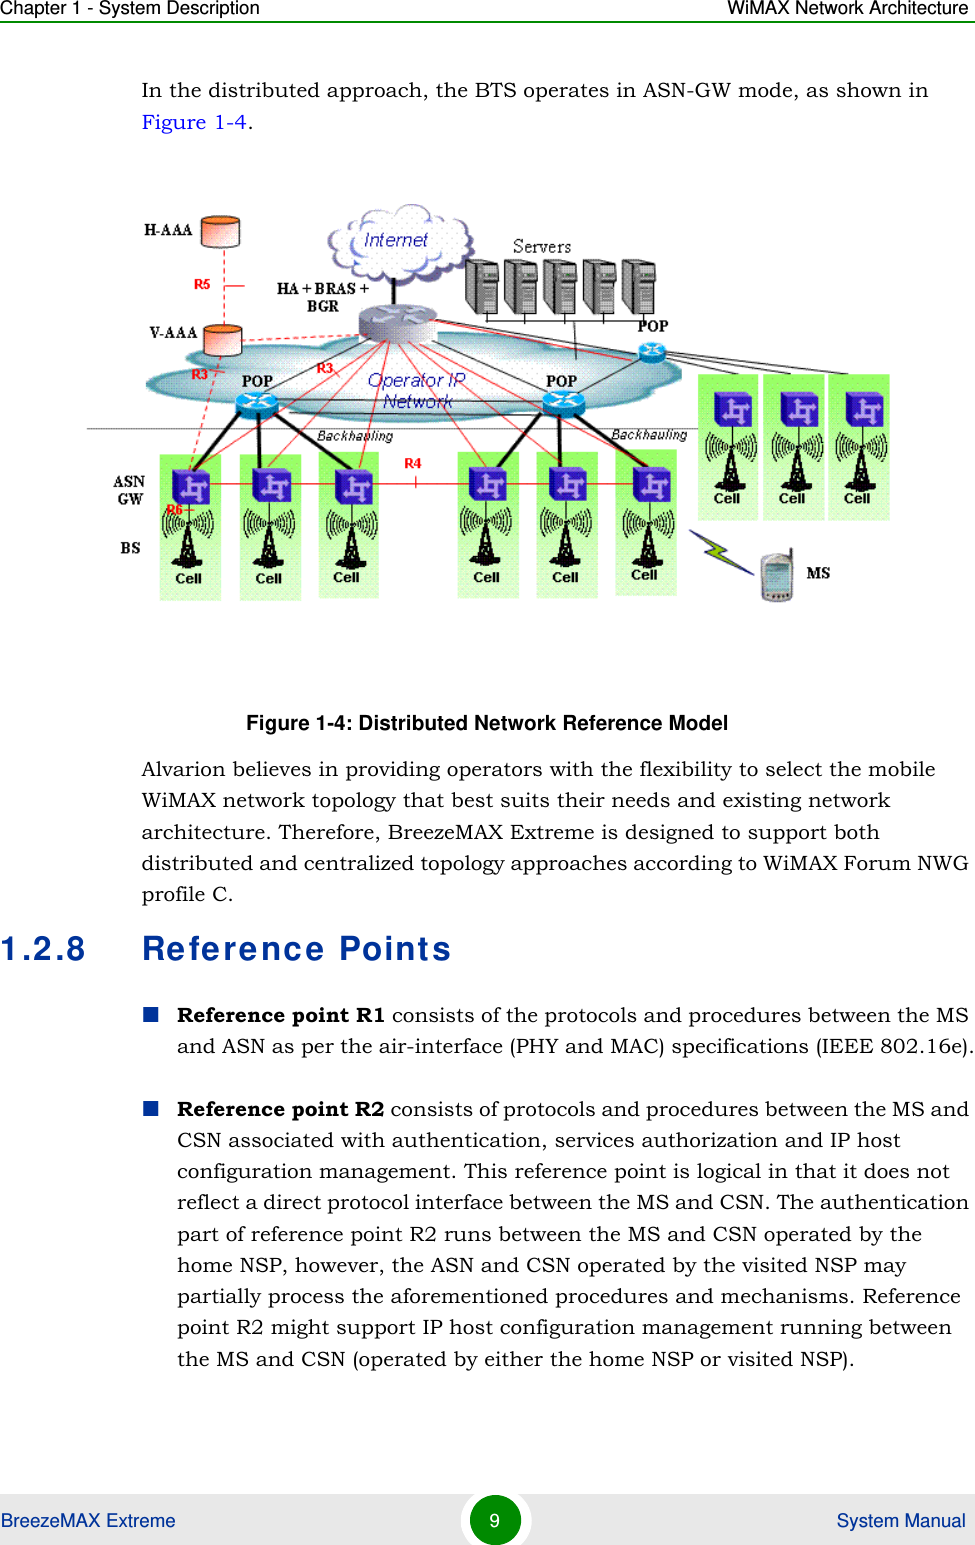 Chapter 1 - System Description WiMAX Network ArchitectureBreezeMAX Extreme 9 System ManualIn the distributed approach, the BTS operates in ASN-GW mode, as shown in Figure 1-4. Alvarion believes in providing operators with the flexibility to select the mobile WiMAX network topology that best suits their needs and existing network architecture. Therefore, BreezeMAX Extreme is designed to support both distributed and centralized topology approaches according to WiMAX Forum NWG profile C.1.2.8 Reference PointsReference point R1 consists of the protocols and procedures between the MS and ASN as per the air-interface (PHY and MAC) specifications (IEEE 802.16e).Reference point R2 consists of protocols and procedures between the MS and CSN associated with authentication, services authorization and IP host configuration management. This reference point is logical in that it does not reflect a direct protocol interface between the MS and CSN. The authentication part of reference point R2 runs between the MS and CSN operated by the home NSP, however, the ASN and CSN operated by the visited NSP may partially process the aforementioned procedures and mechanisms. Reference point R2 might support IP host configuration management running between the MS and CSN (operated by either the home NSP or visited NSP).Figure 1-4: Distributed Network Reference Model